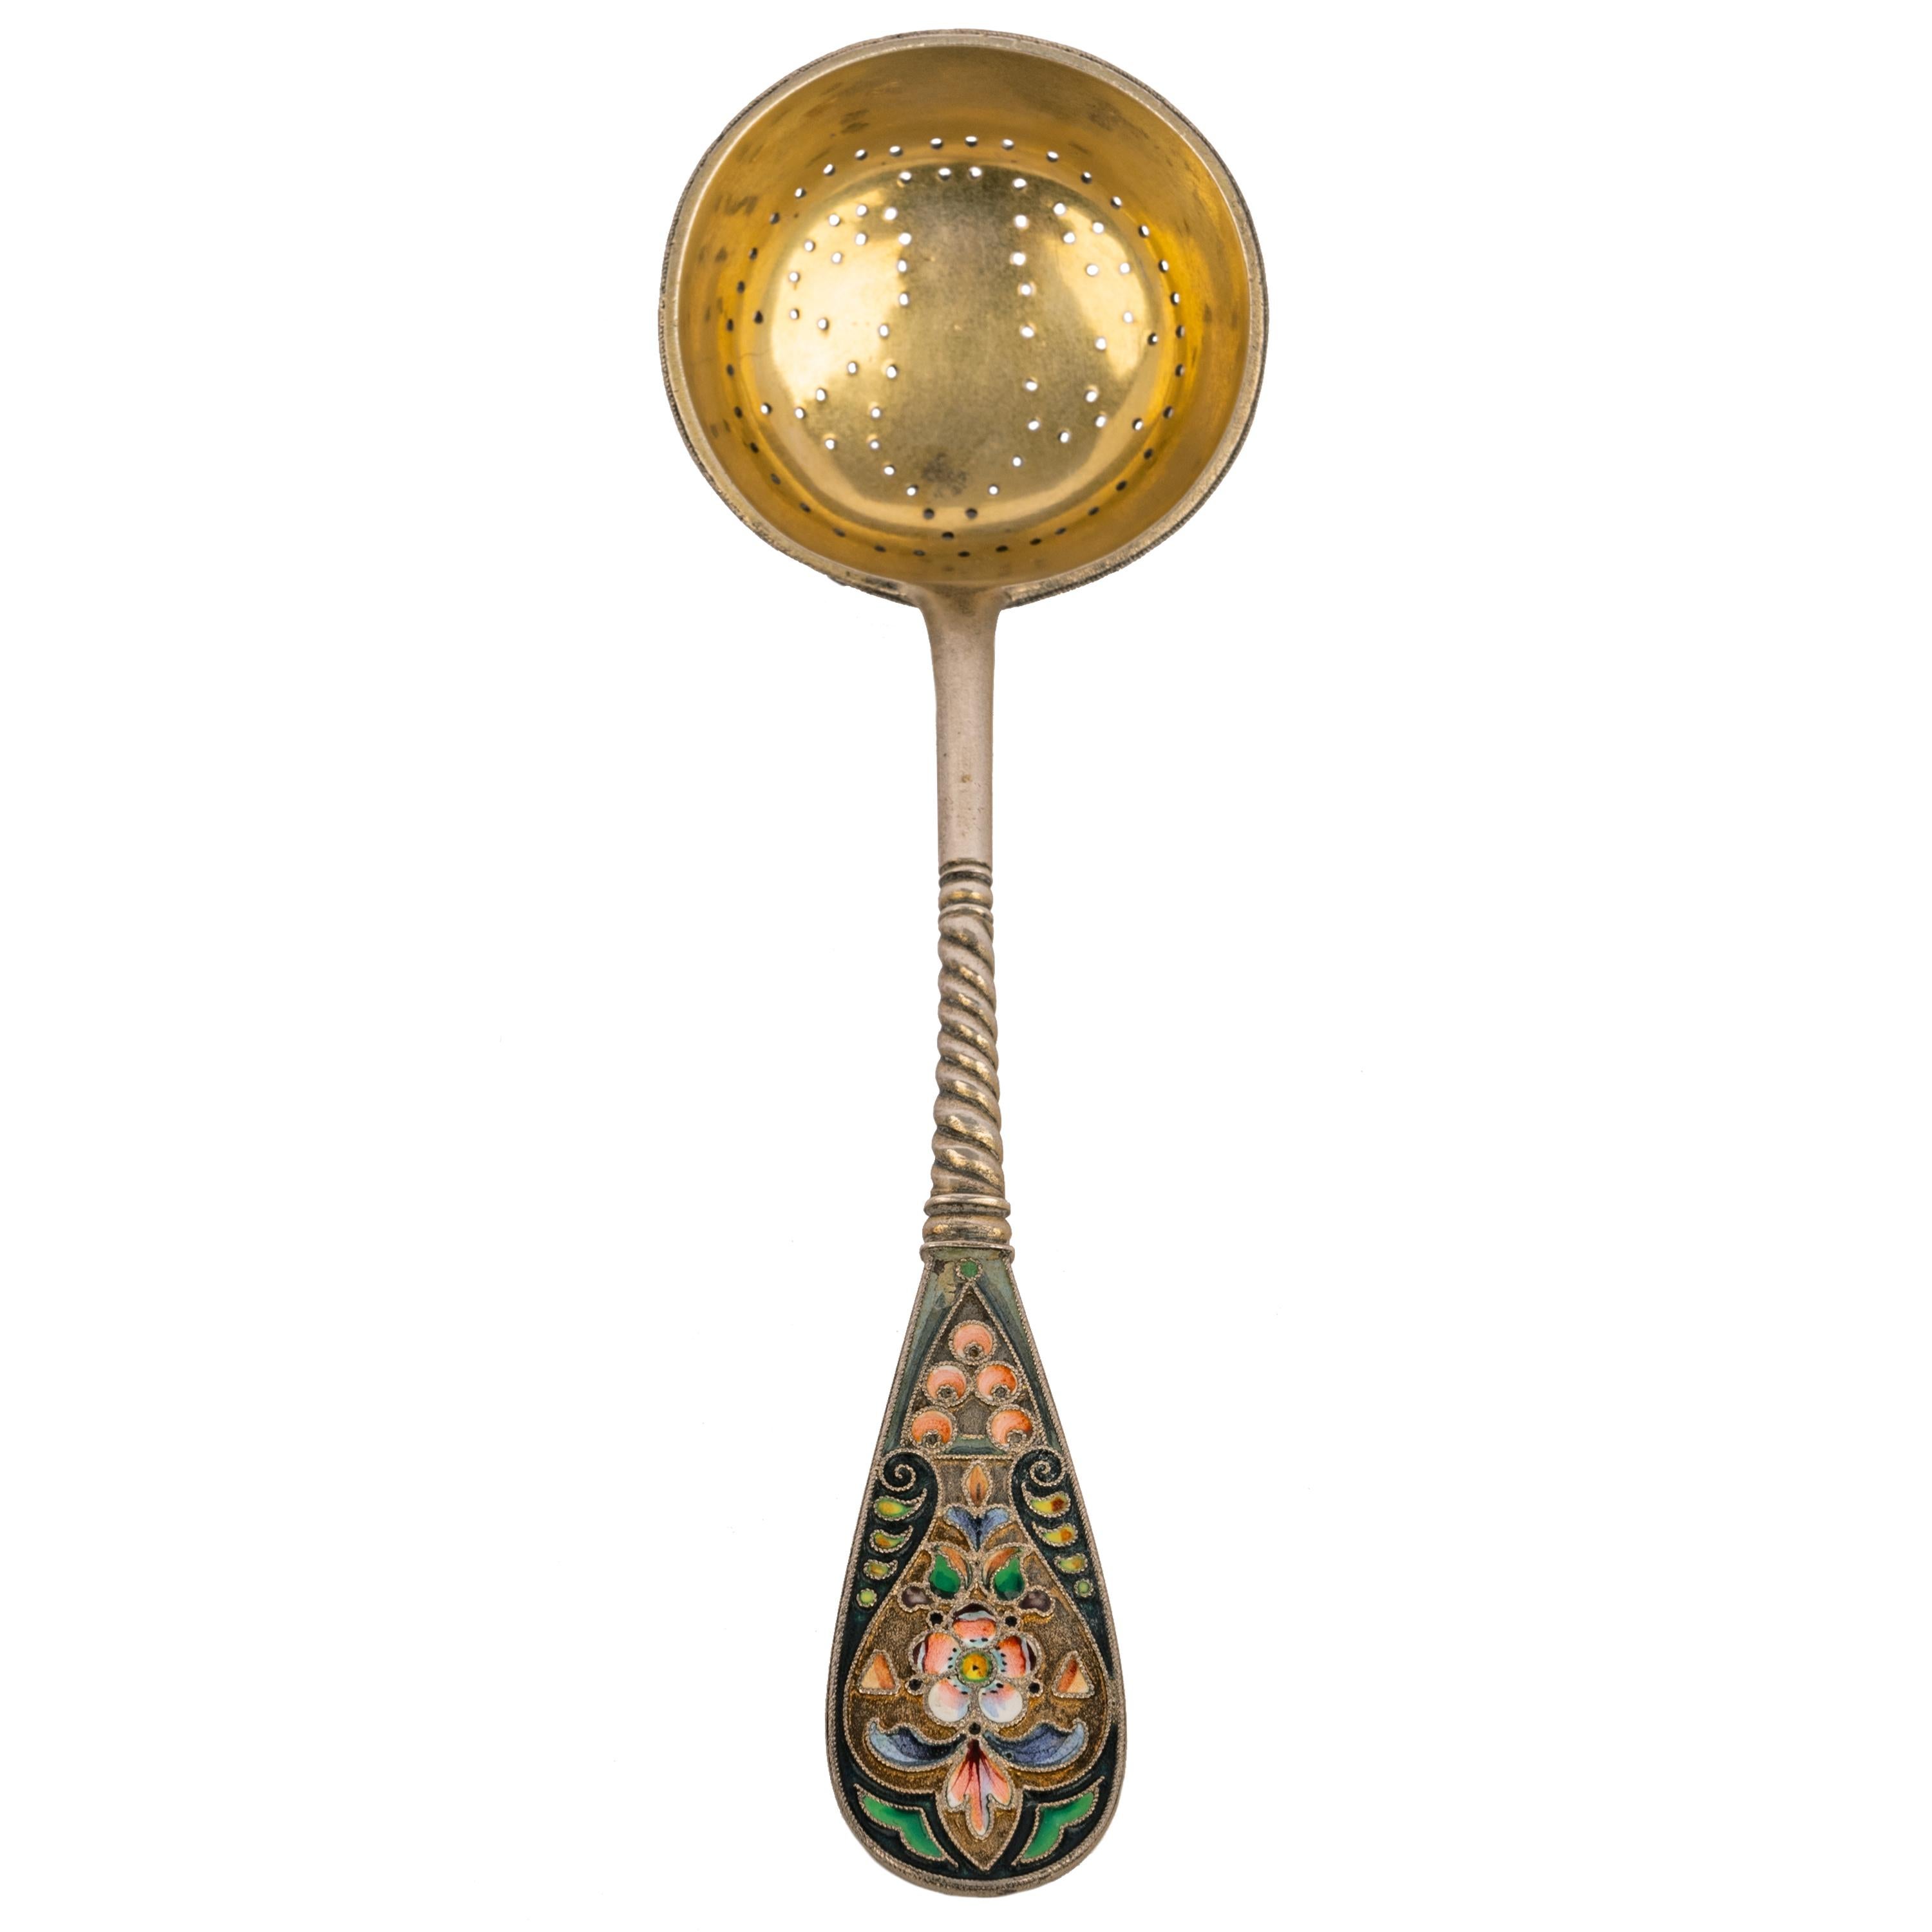 A good antique Russian Imperial silver-gilt cloisonné enamel tea strainer, Moscow, circa 1908.
The handle having floral enamel decoration to the front & rear and a spiral stem, the exterior of the bowl having corresponding cloisonné decoration and